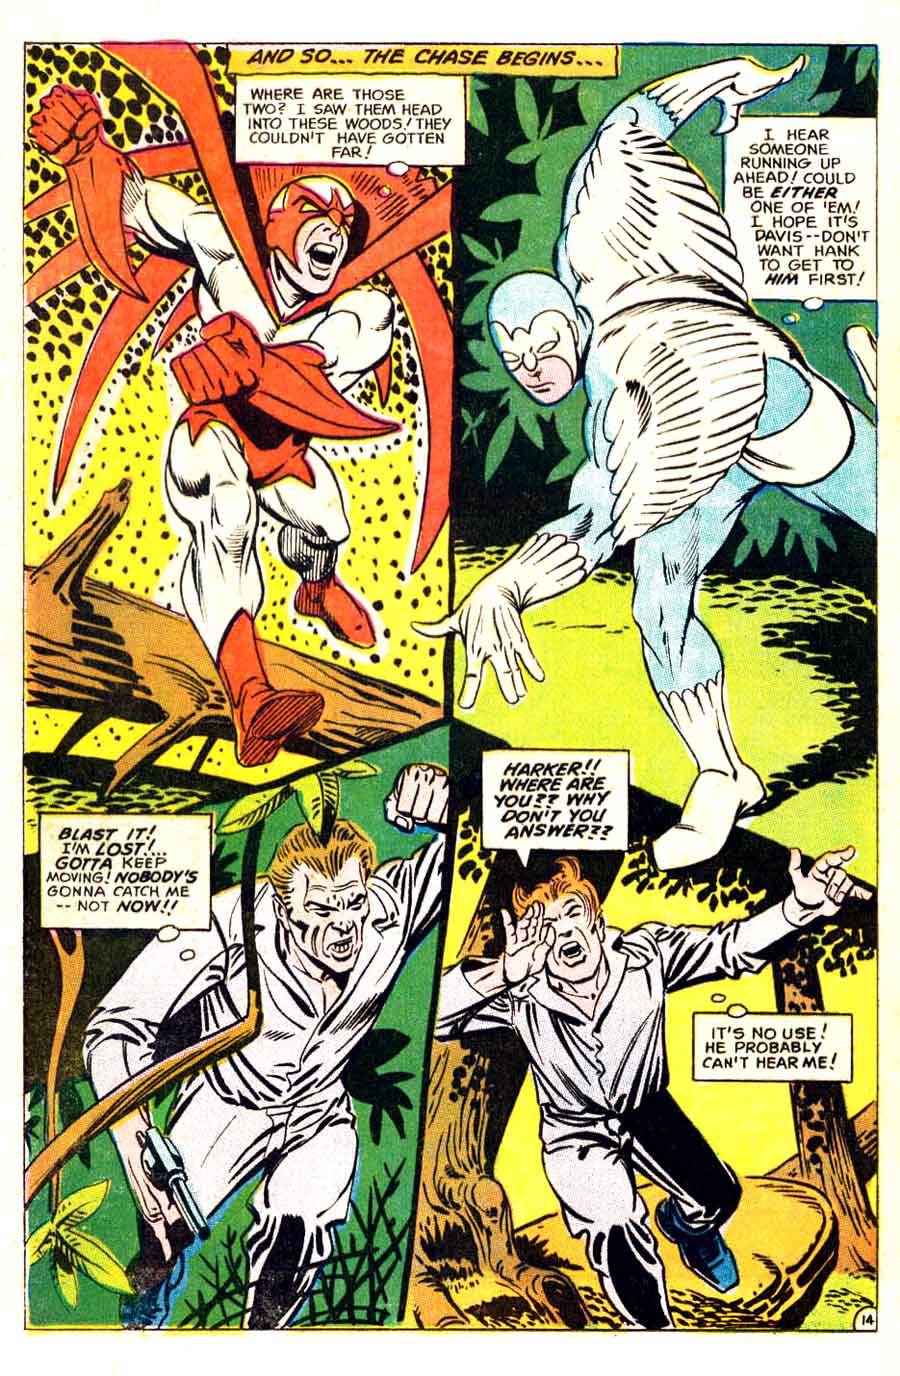 Hawk and the Dove v1 #2 dc comic book page art by Steve Ditko